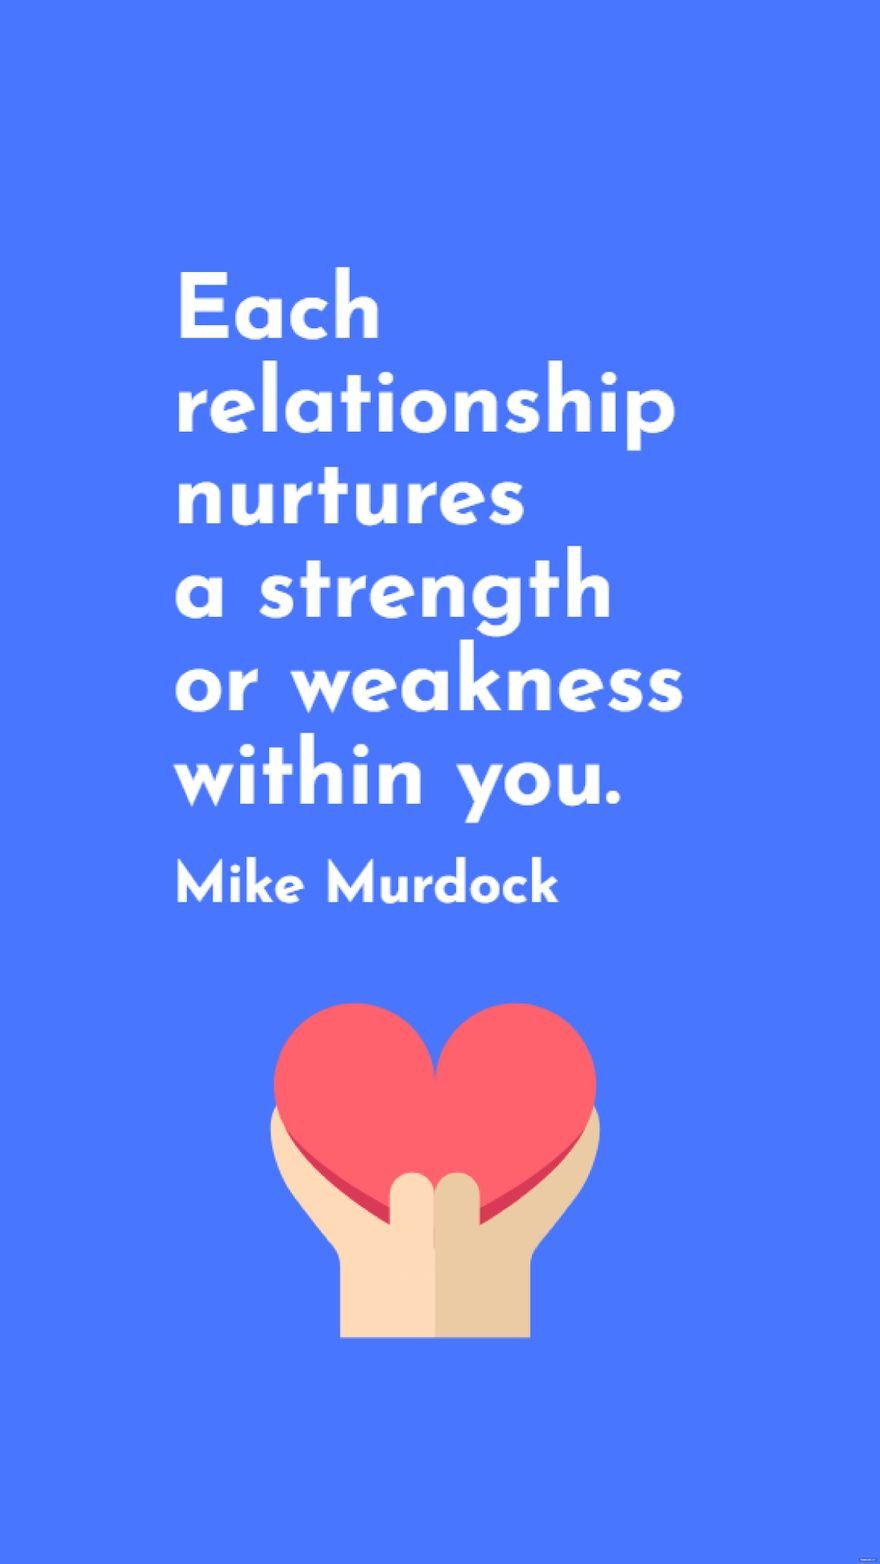 Mike Murdock - Each relationship nurtures a strength or weakness within you.